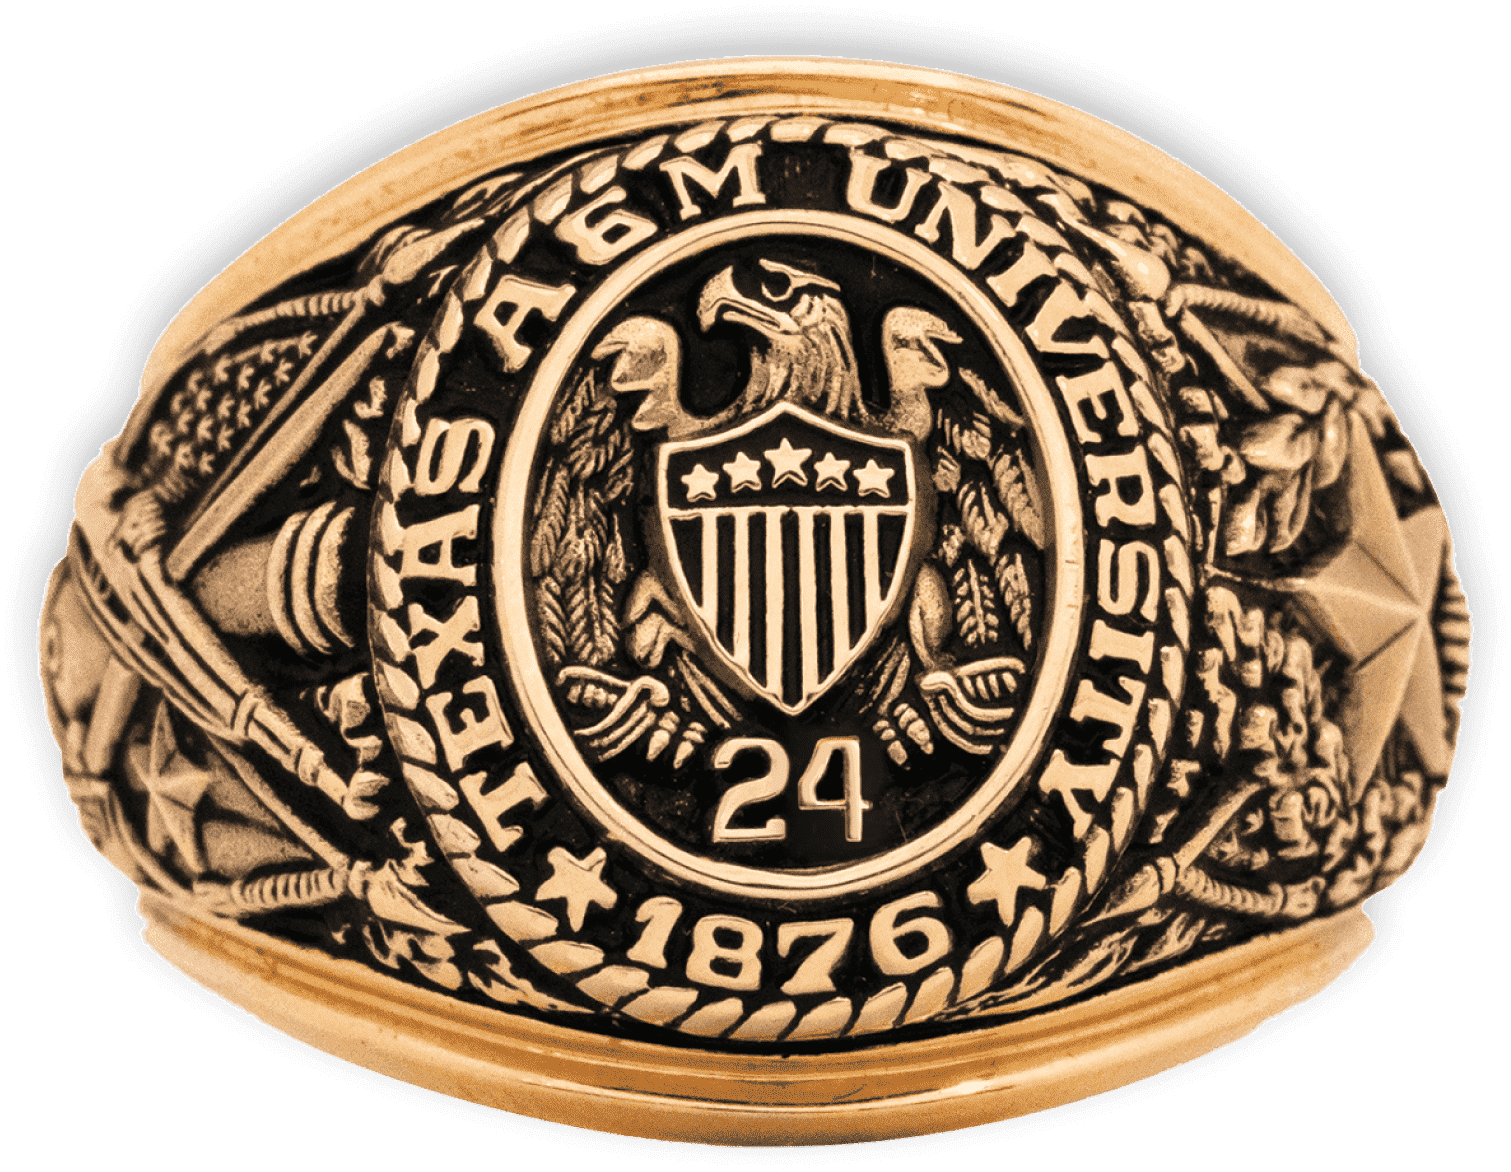 big image of an Aggie Ring